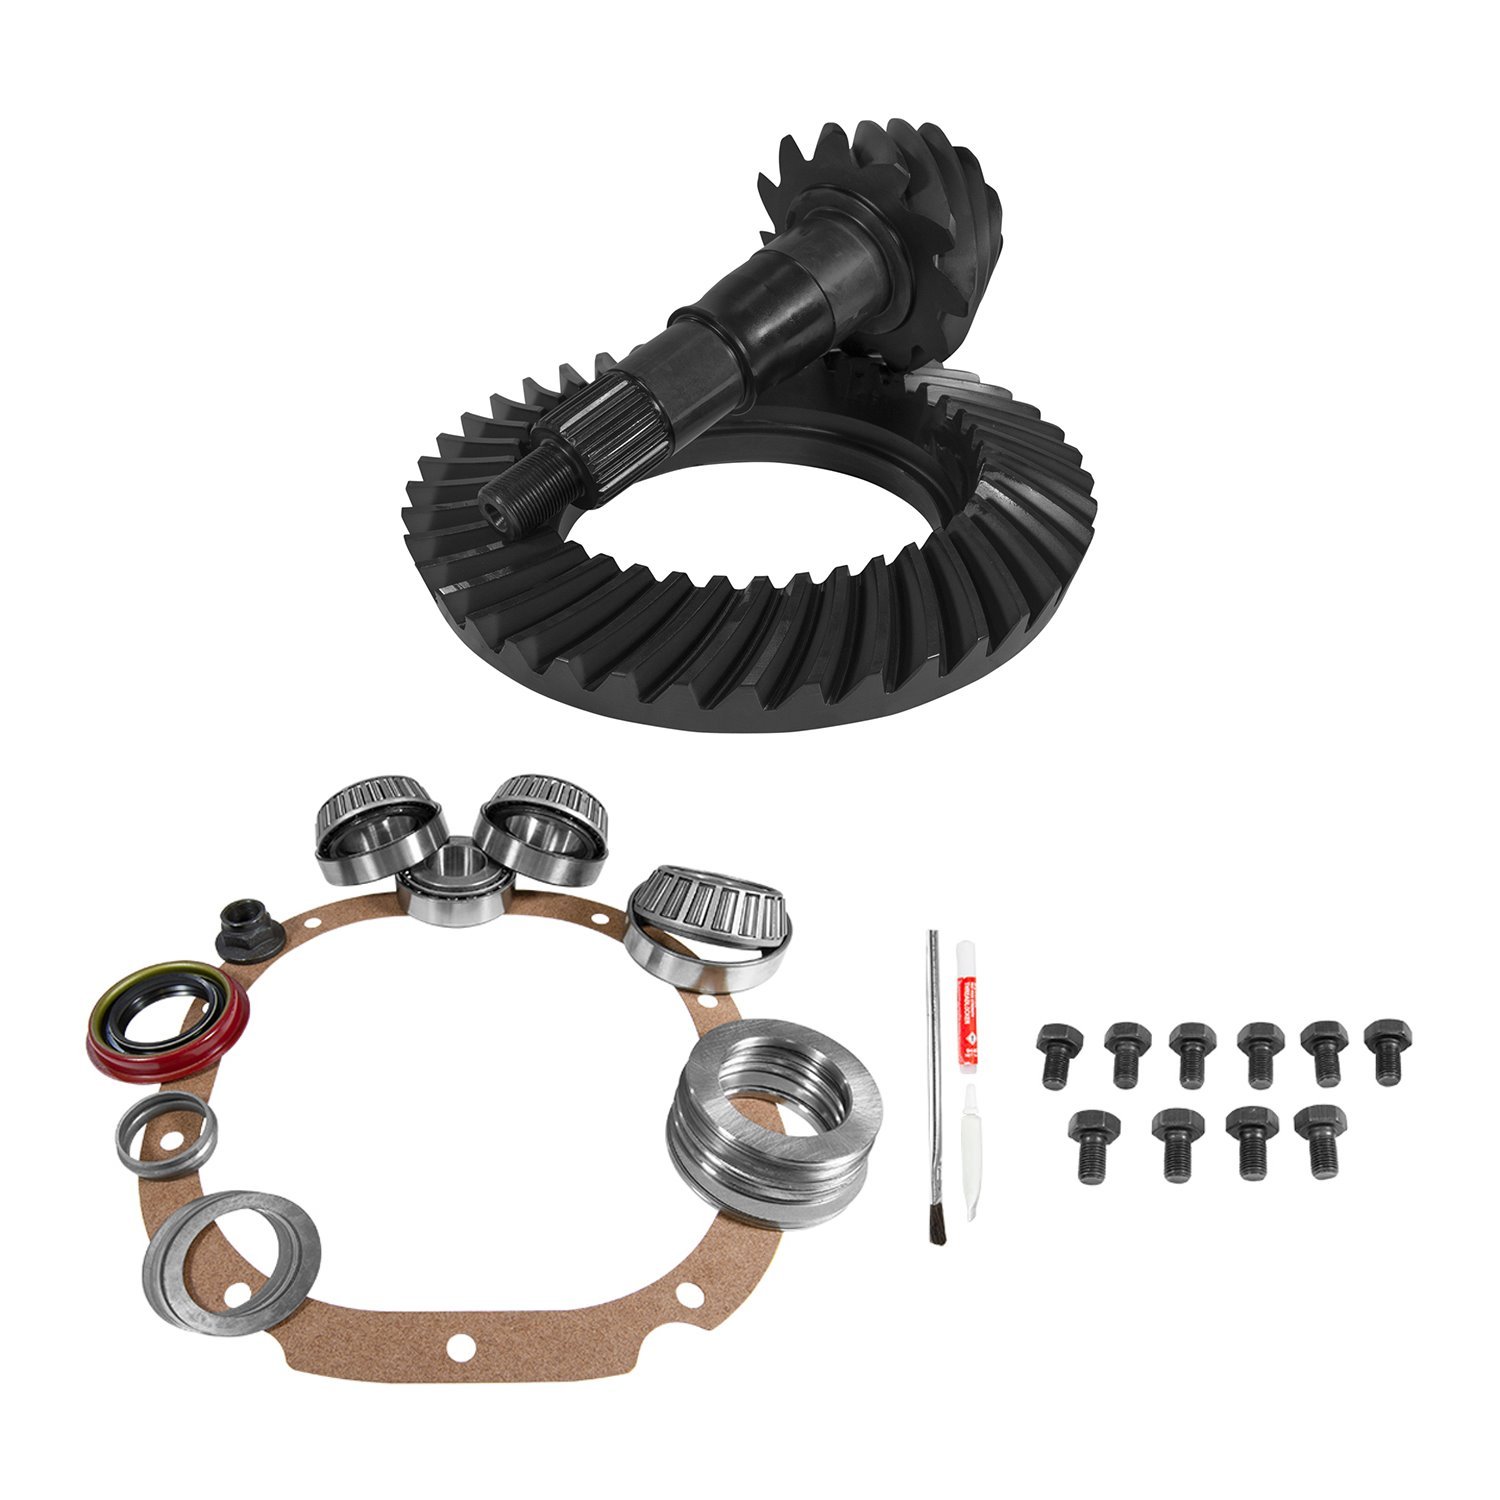 F88B1002 Ring & Pinion w/Installation Kit Bundle for 1983-2010 Ford Vehicles 8.8 Differentials [4.11 Ratio]